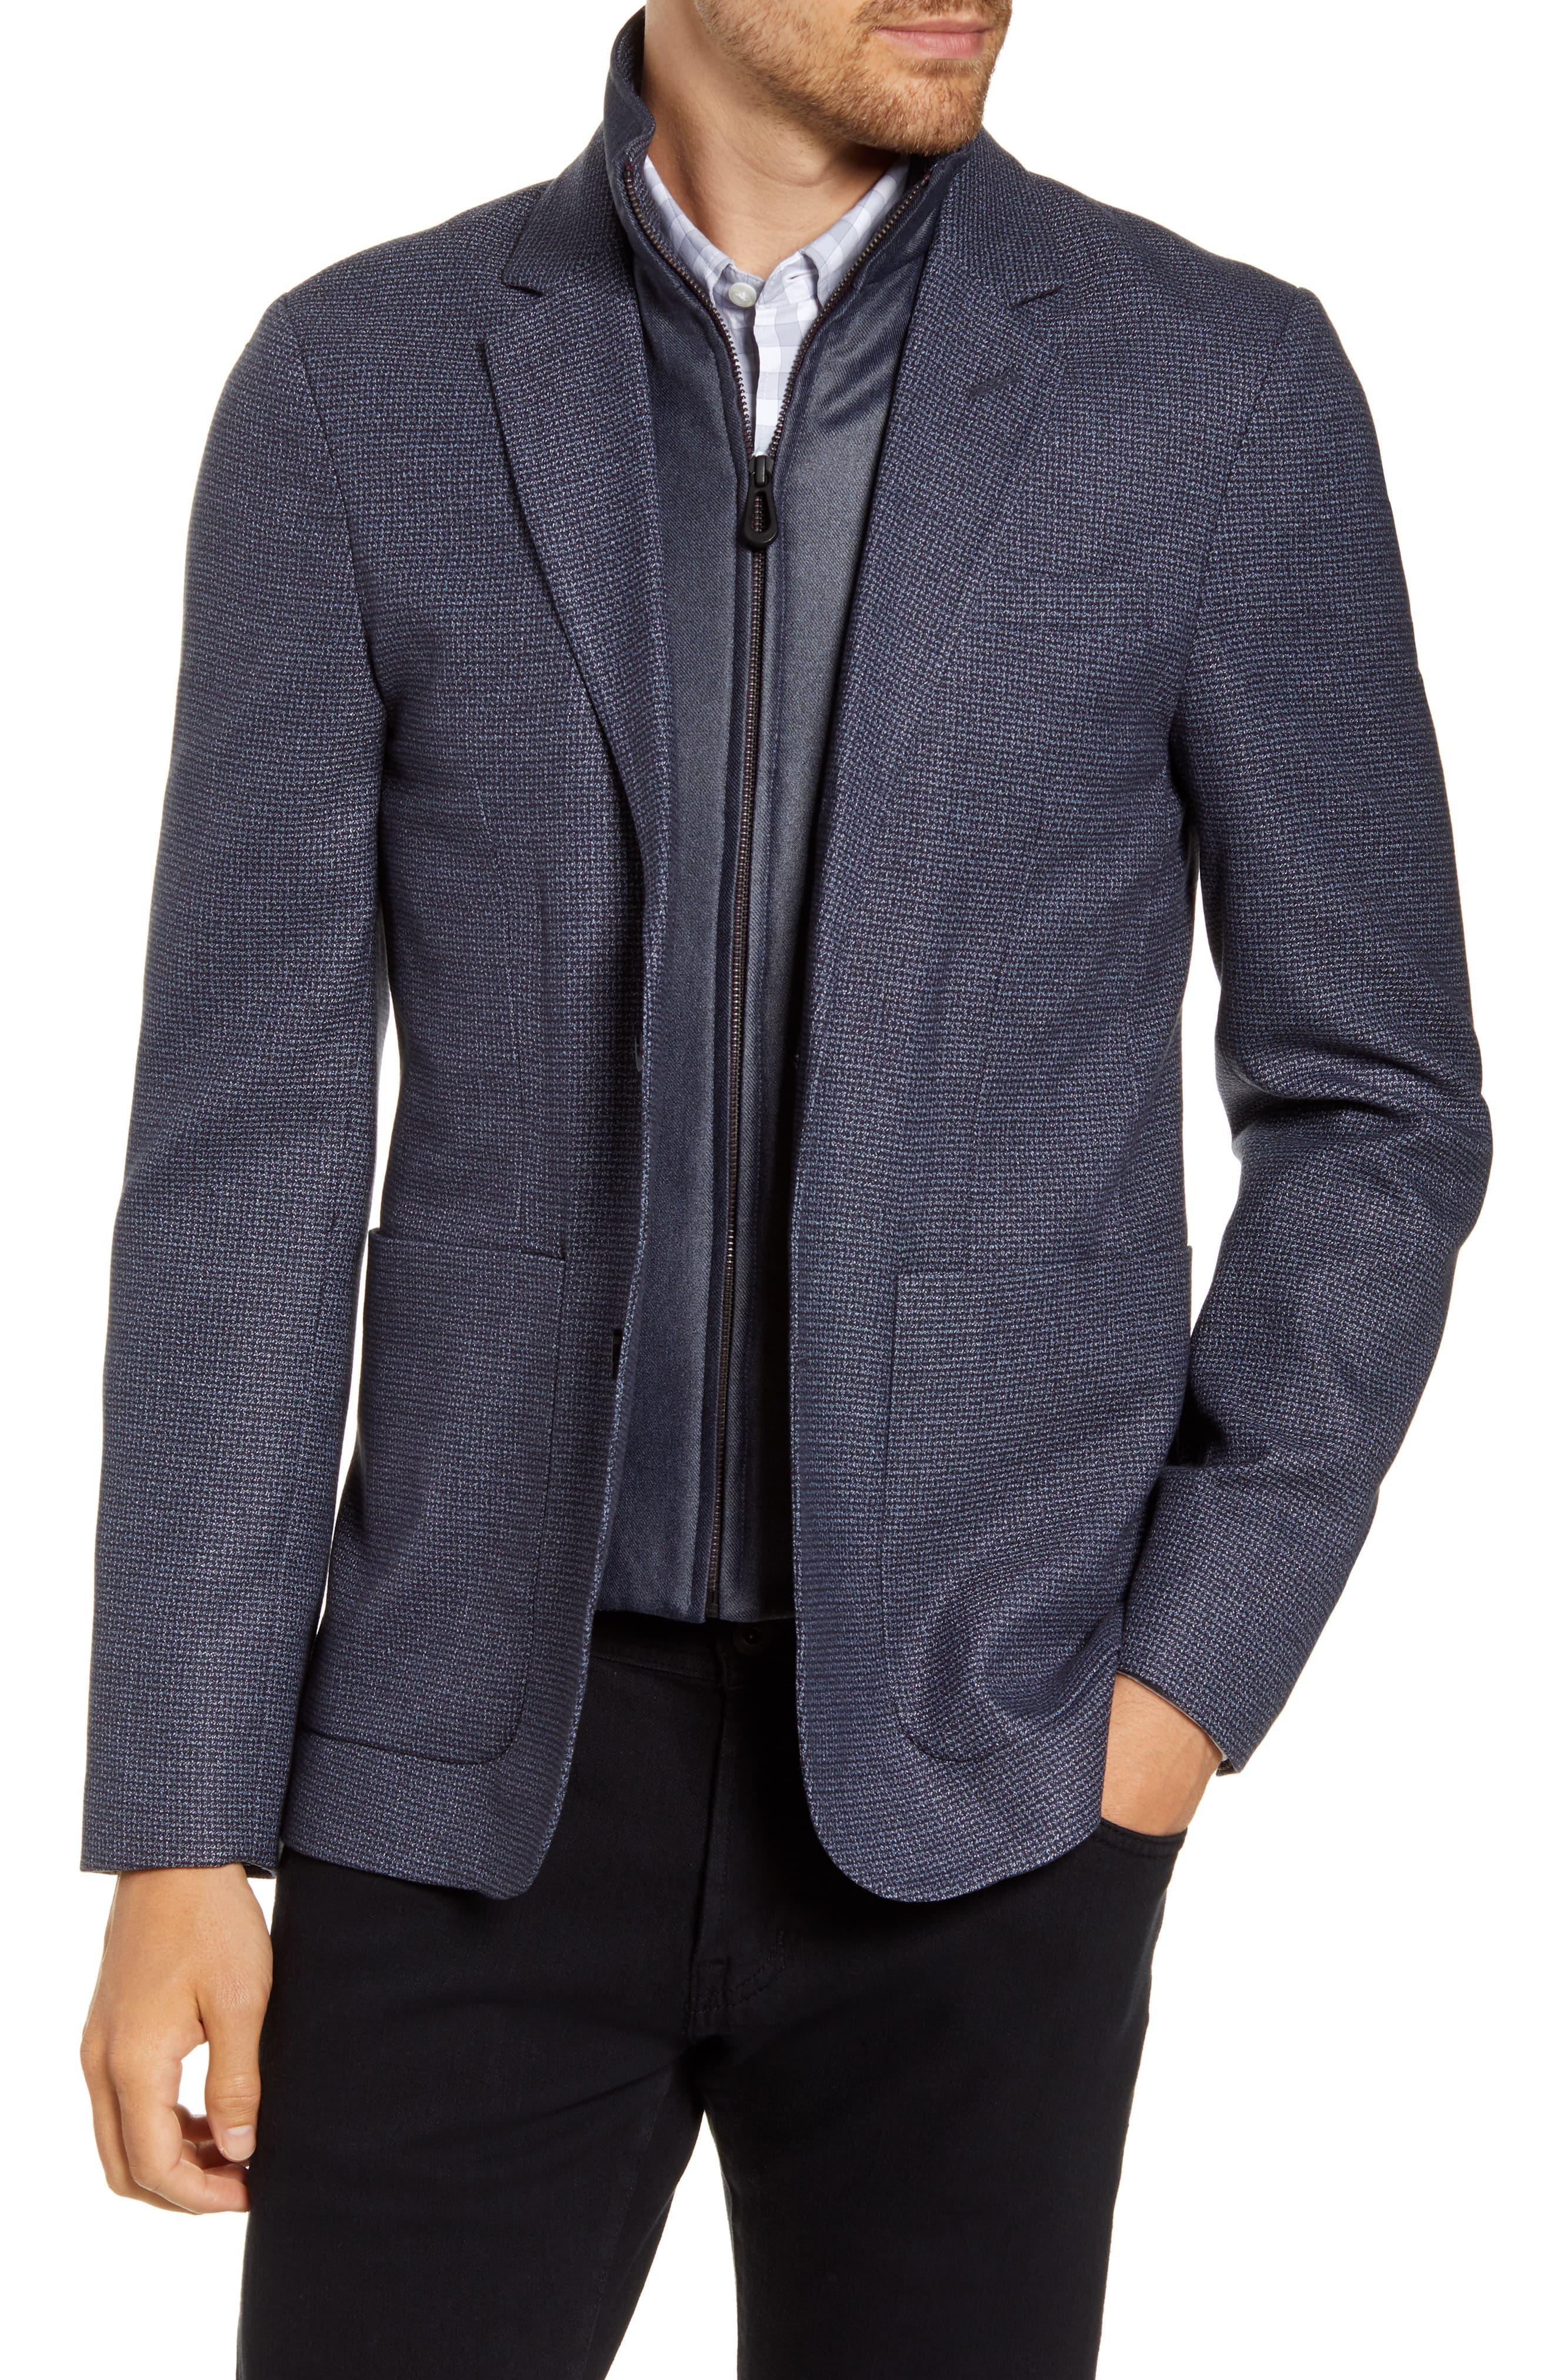 Ted Baker Sport Coat With Removable Bib in Blue for Men - Lyst